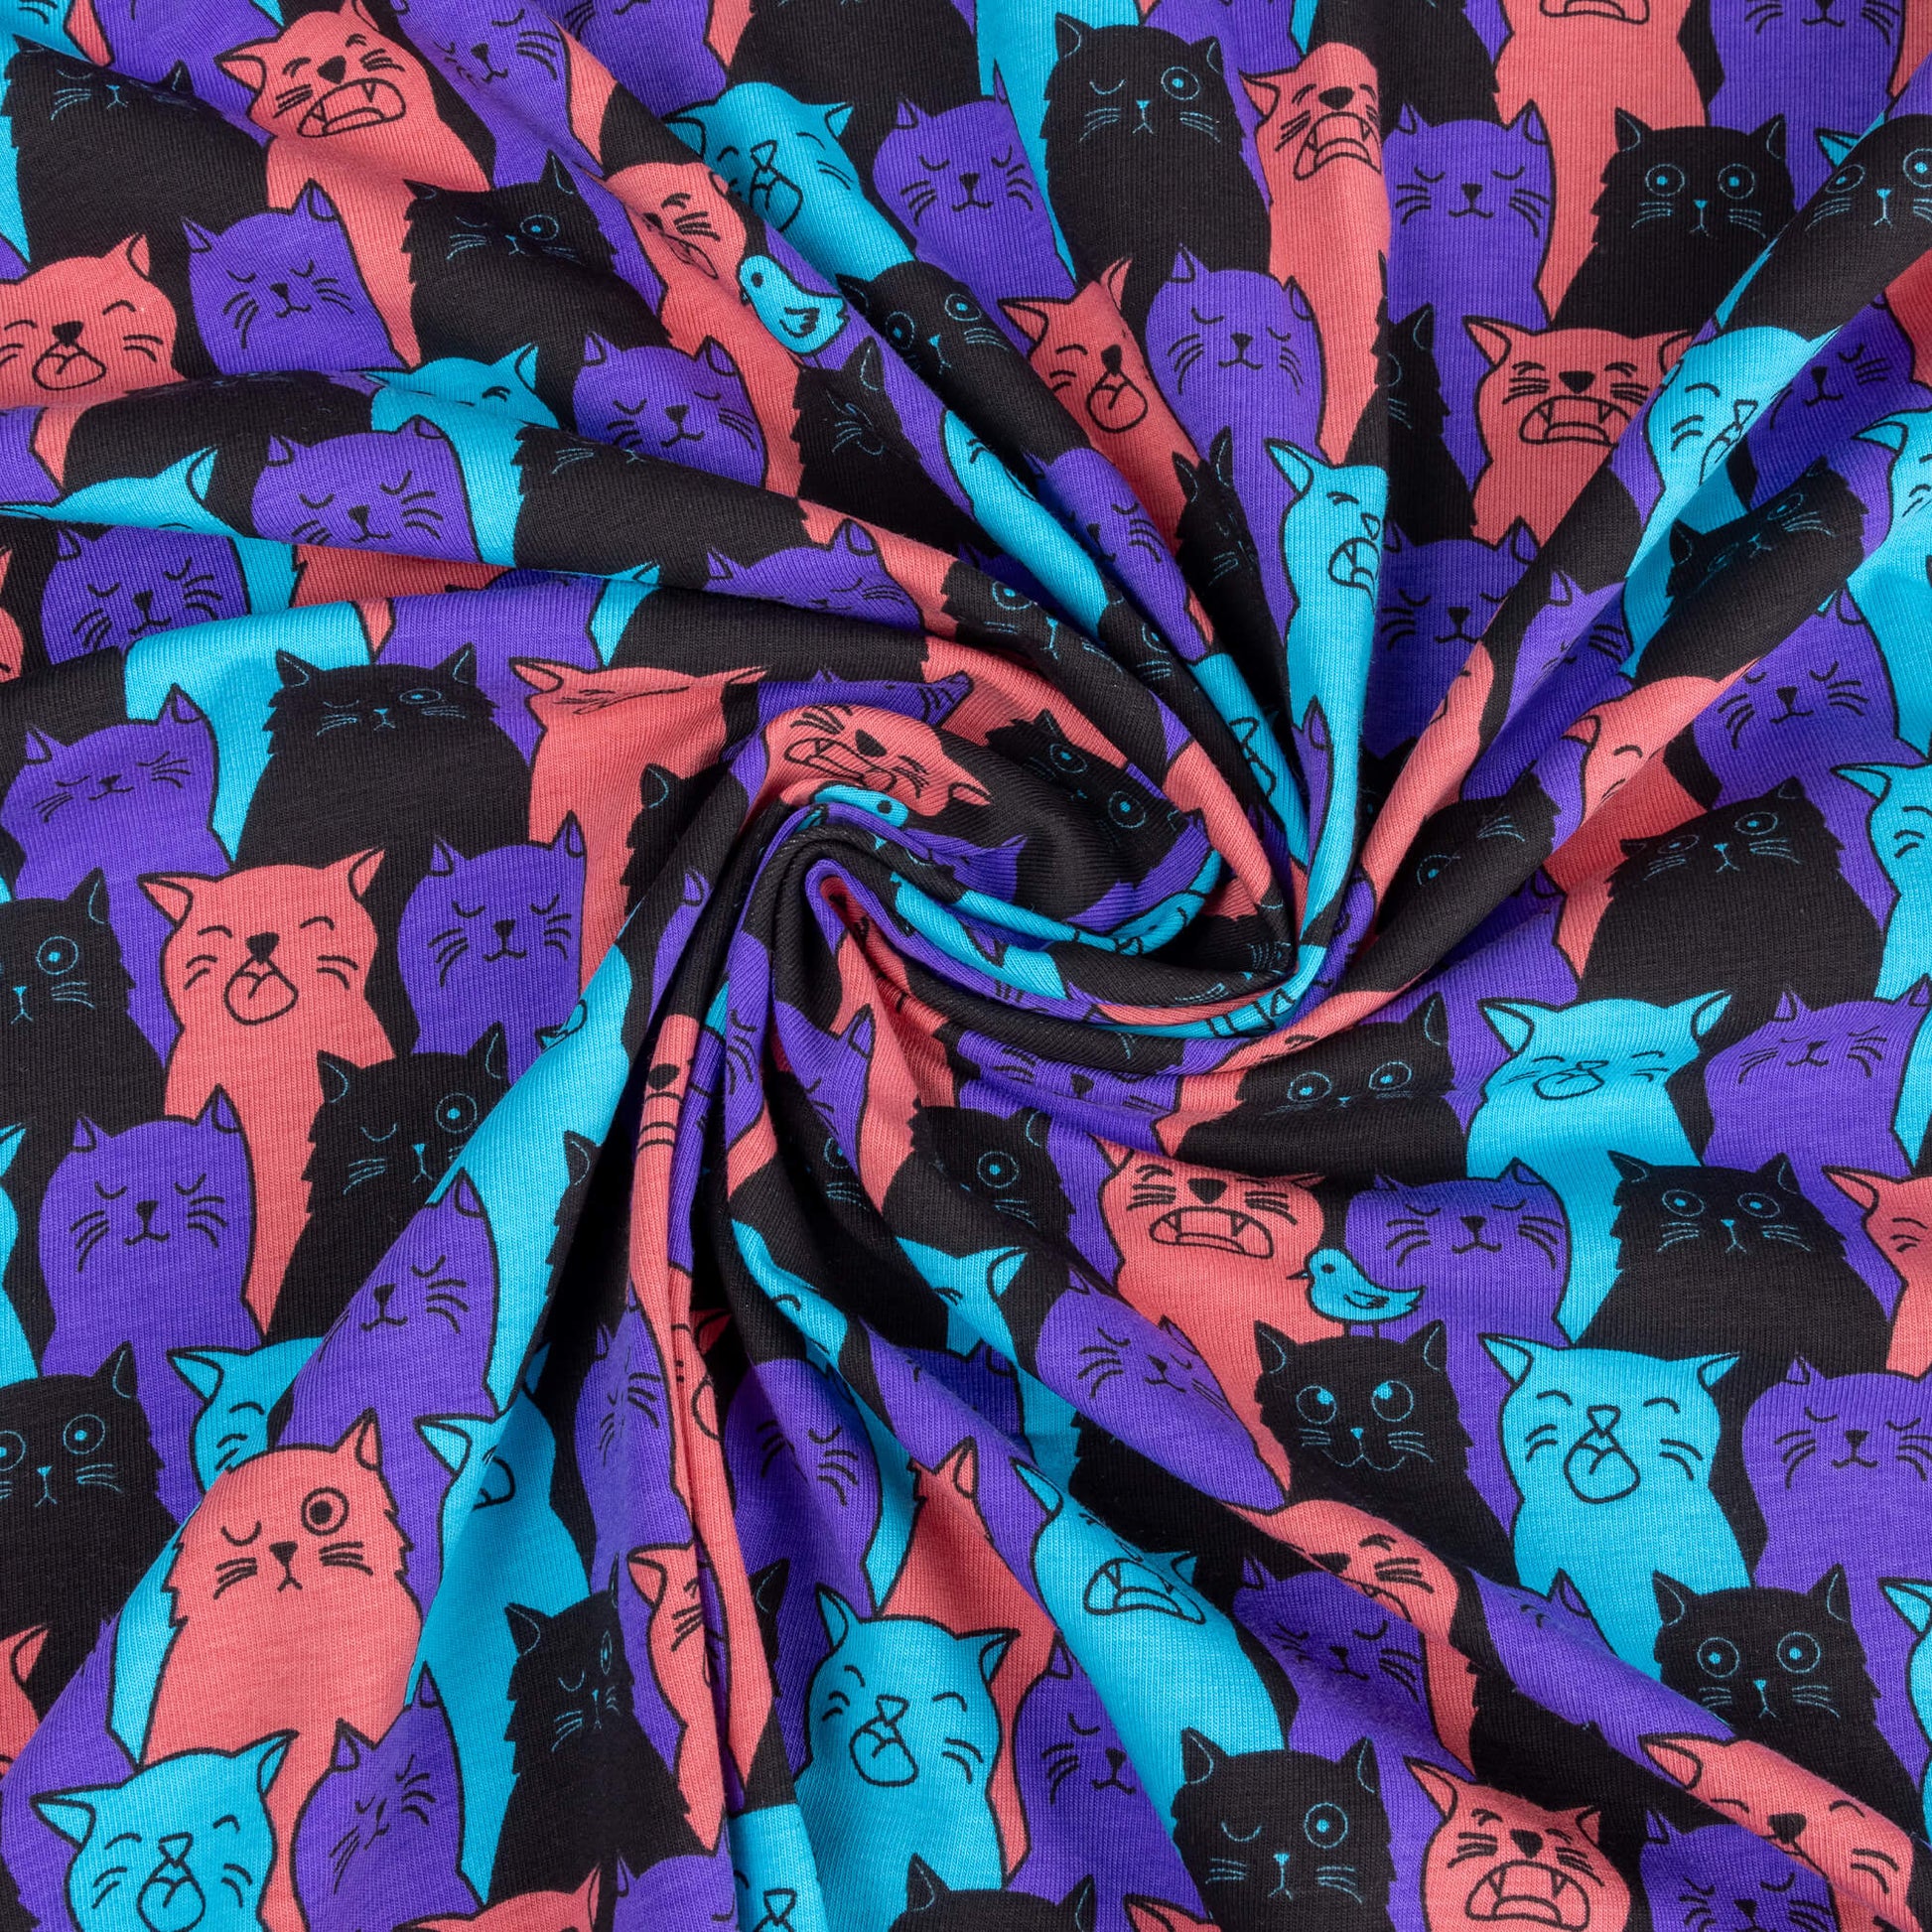  A swirly stretch jersey fabric featuring cats that look like they are winking, singing or have their eyes shut, their is a bird one one of their heads. They are purple, black, pink and bright blue.